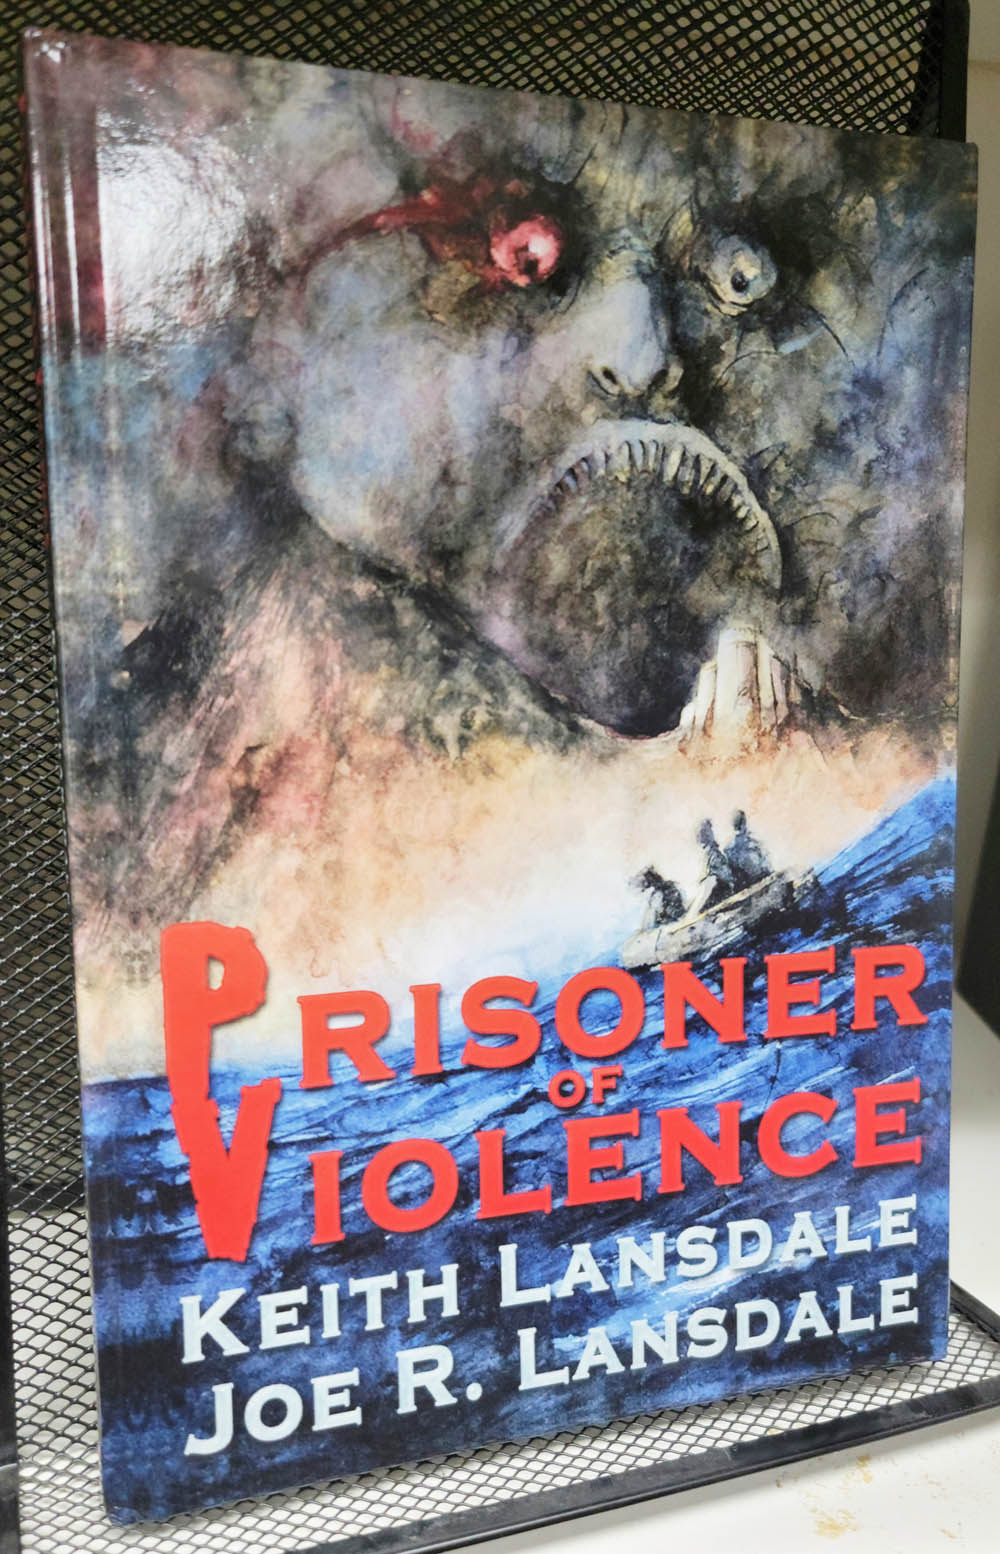 UPDATE for Prisoner of Violence by Keith Lansdale and Joe R. Lansdale - Final Stages of Preproduction!